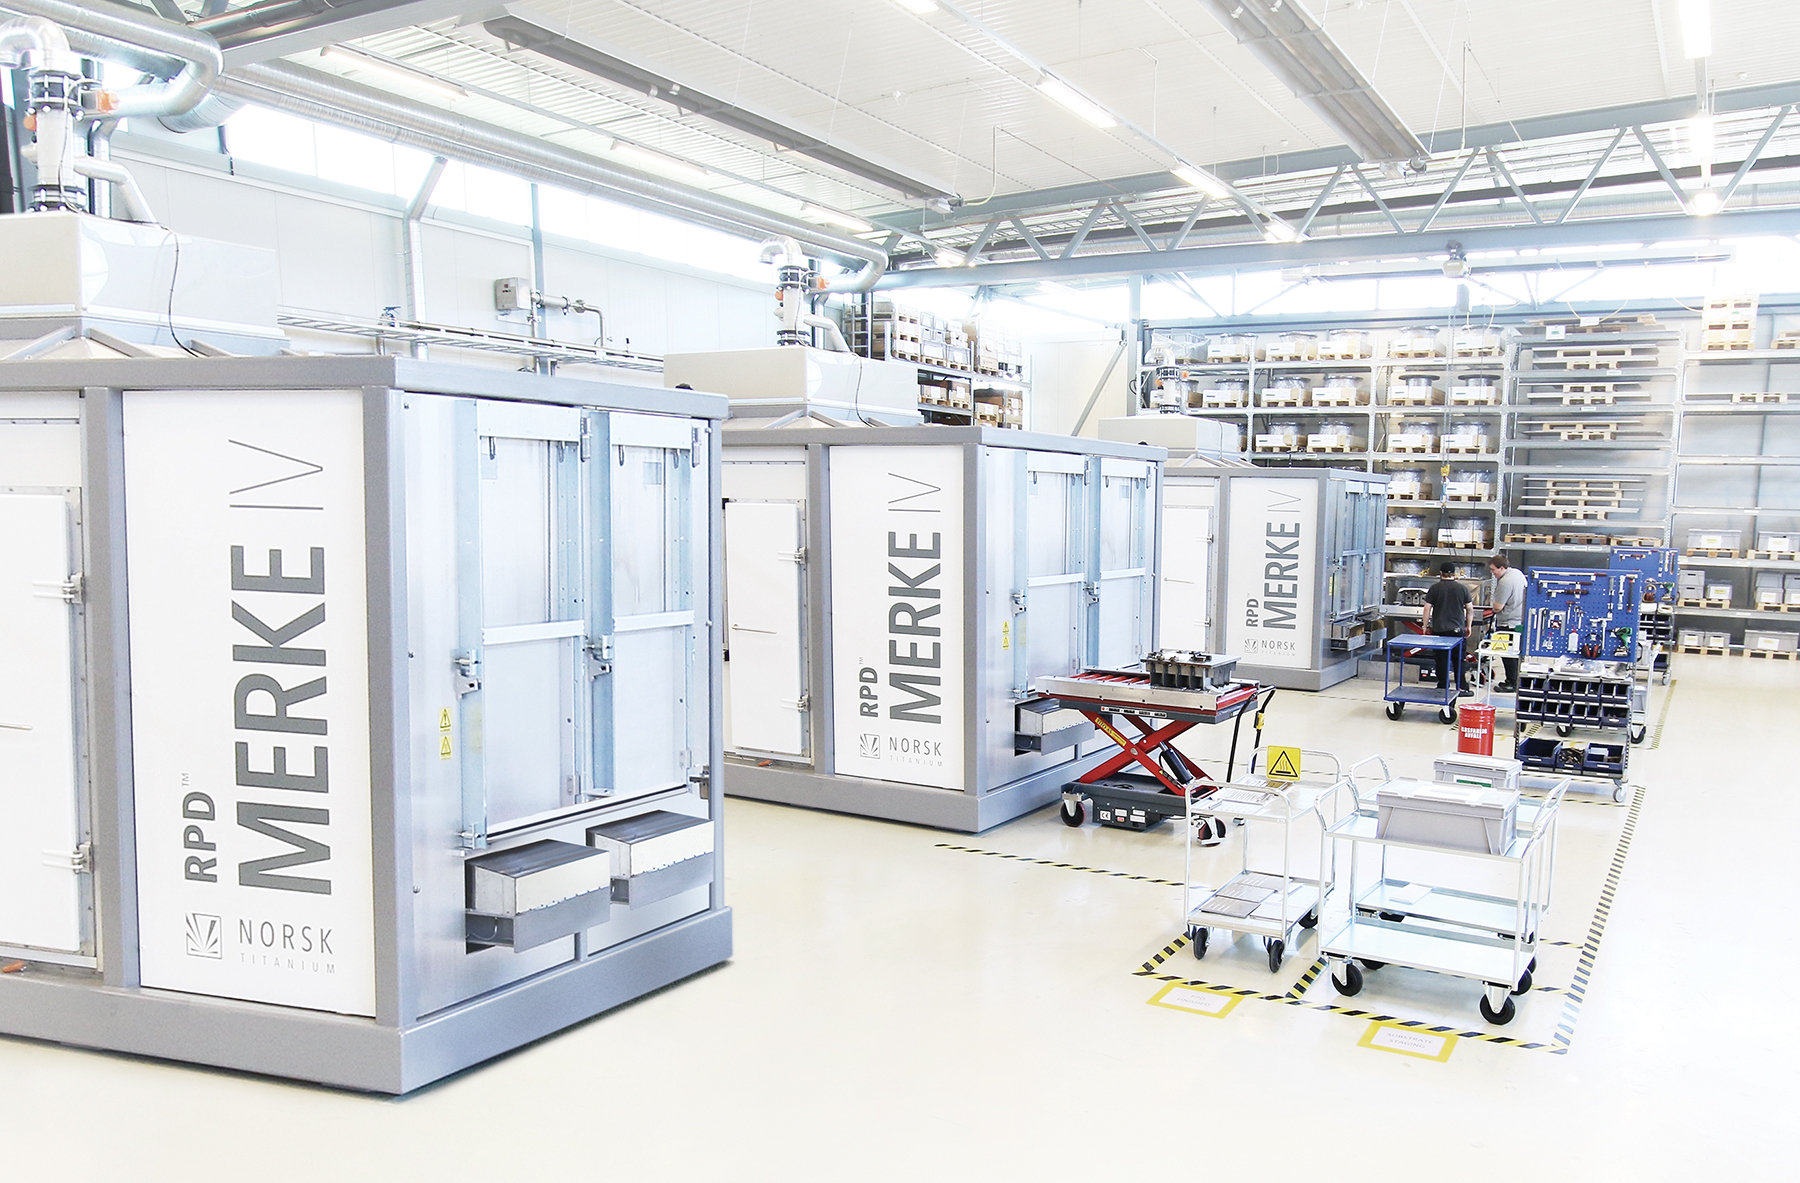 Norsk’s rapid plasma deposition machines can make 20 metric tons of aerospace-grade, structural titanium per year. (Photo courtesy Business Wire)